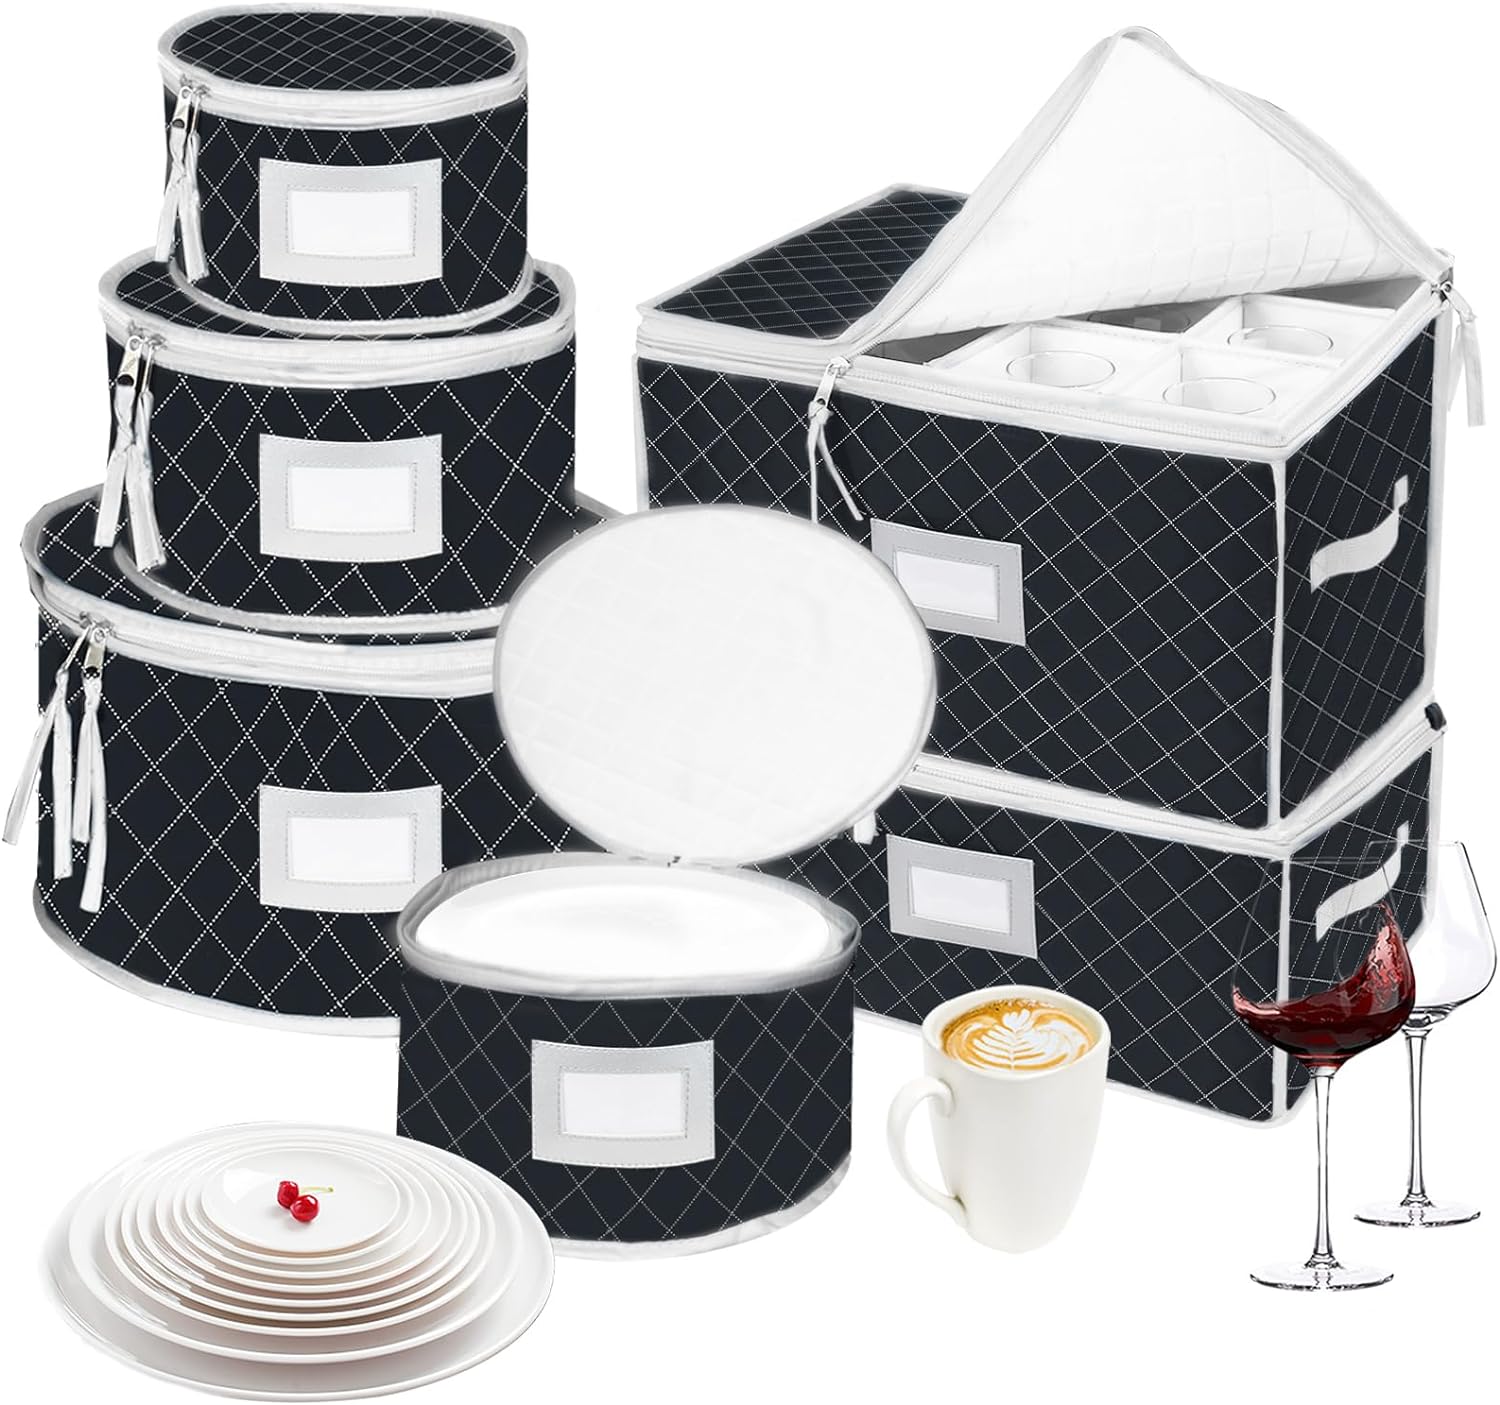 VERONLY China Dinnerware Storage Containers Set- Dish,Mug,Stemware Storage Cases - Quilted Box Bins Stackable with Divider,handles,Clear Window for Cups,Plates,Wine Glasses Moving Set of 6 (Black)